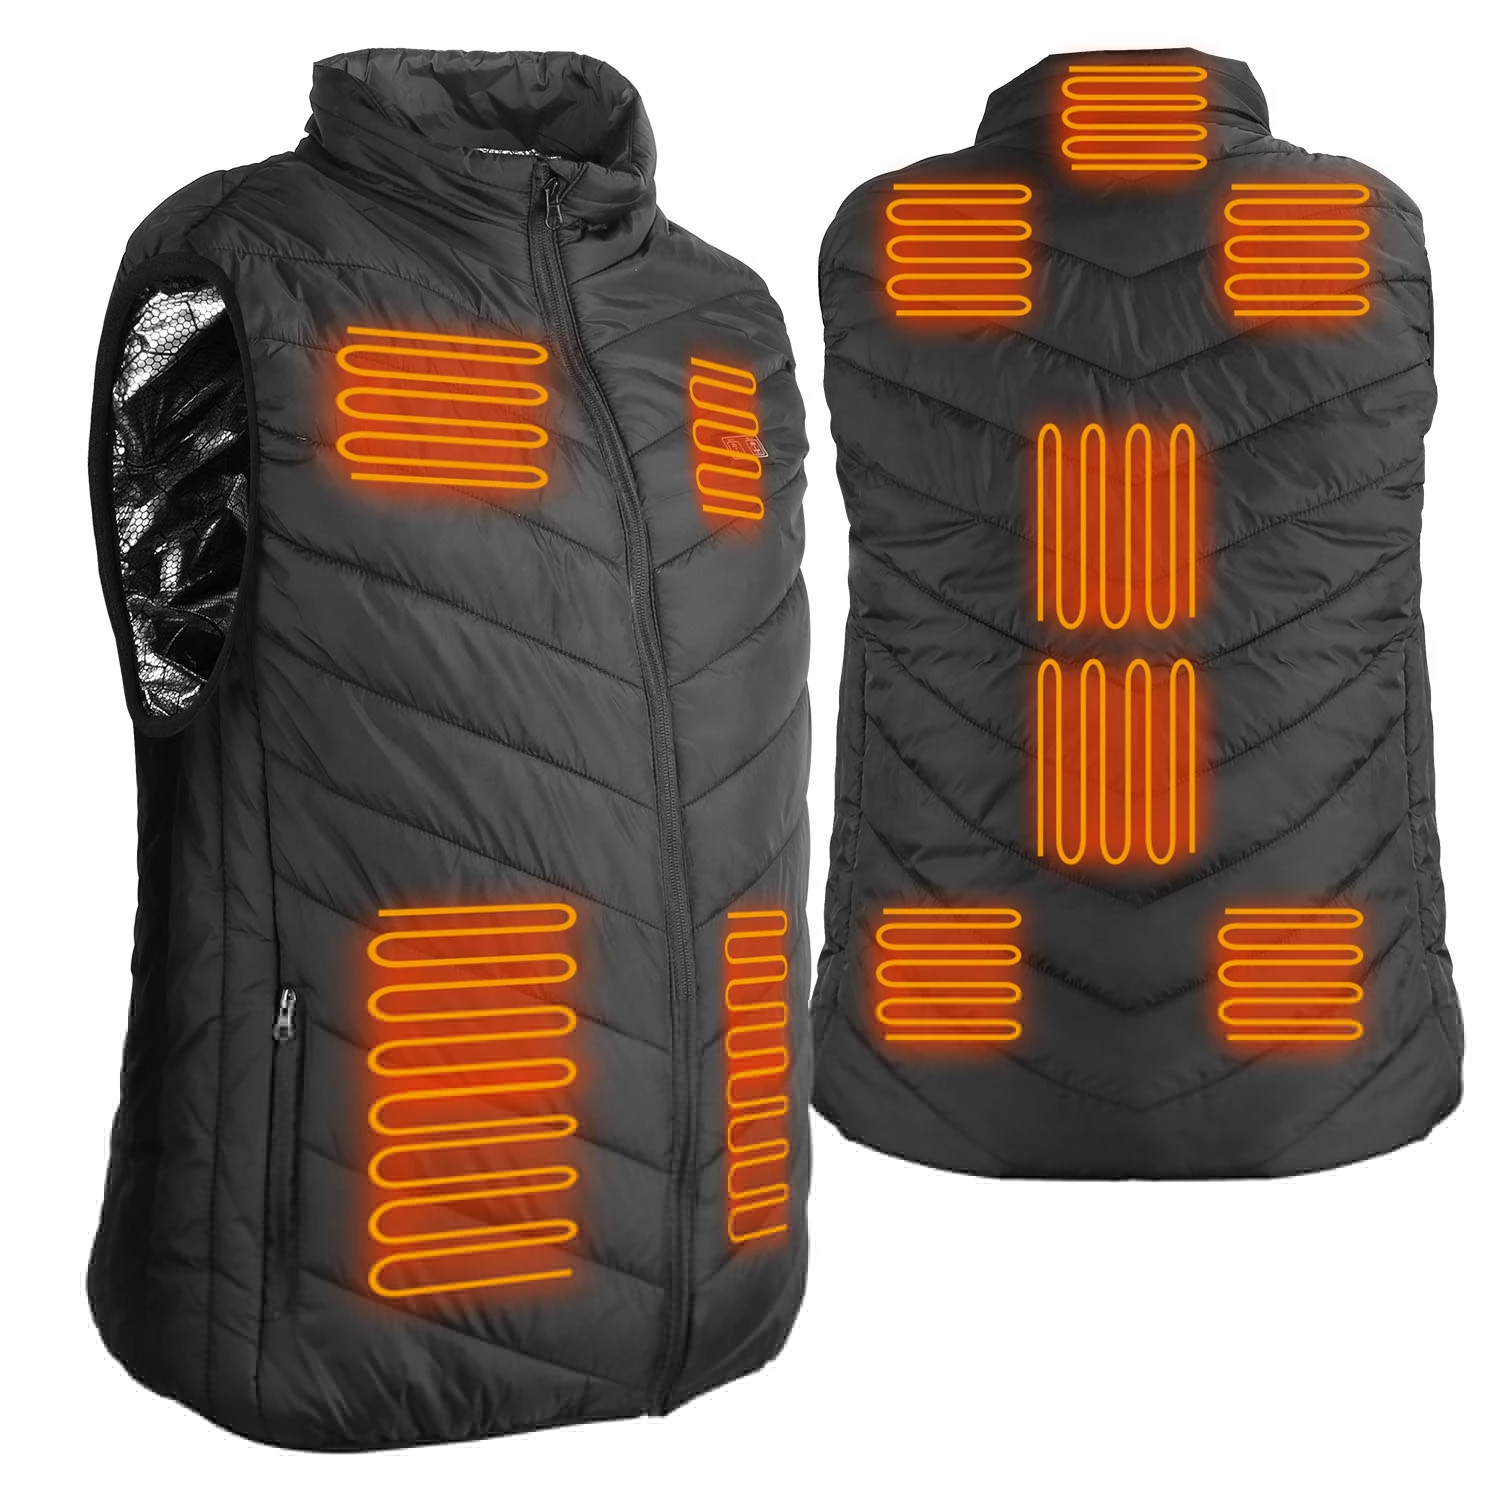 Heated Vest Electric USB Jacket Men Women Heating Coat Thermal Body Warmer Wear With 3 Temperature